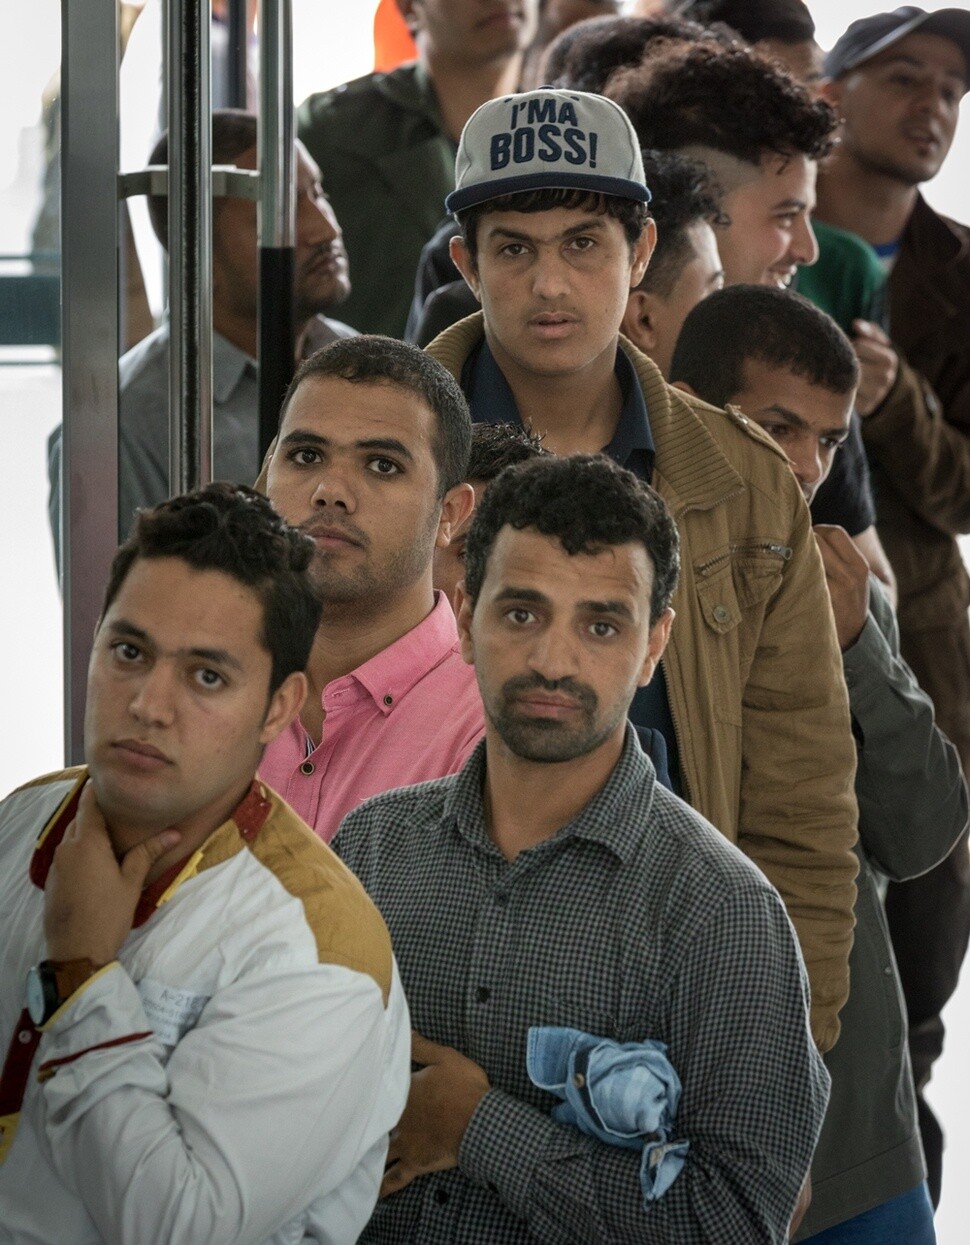 Yemeni asylum seekers wait for their turn at a refugee job fair at the Jeju Immigration Office on June 18. (Park Seung-hwa